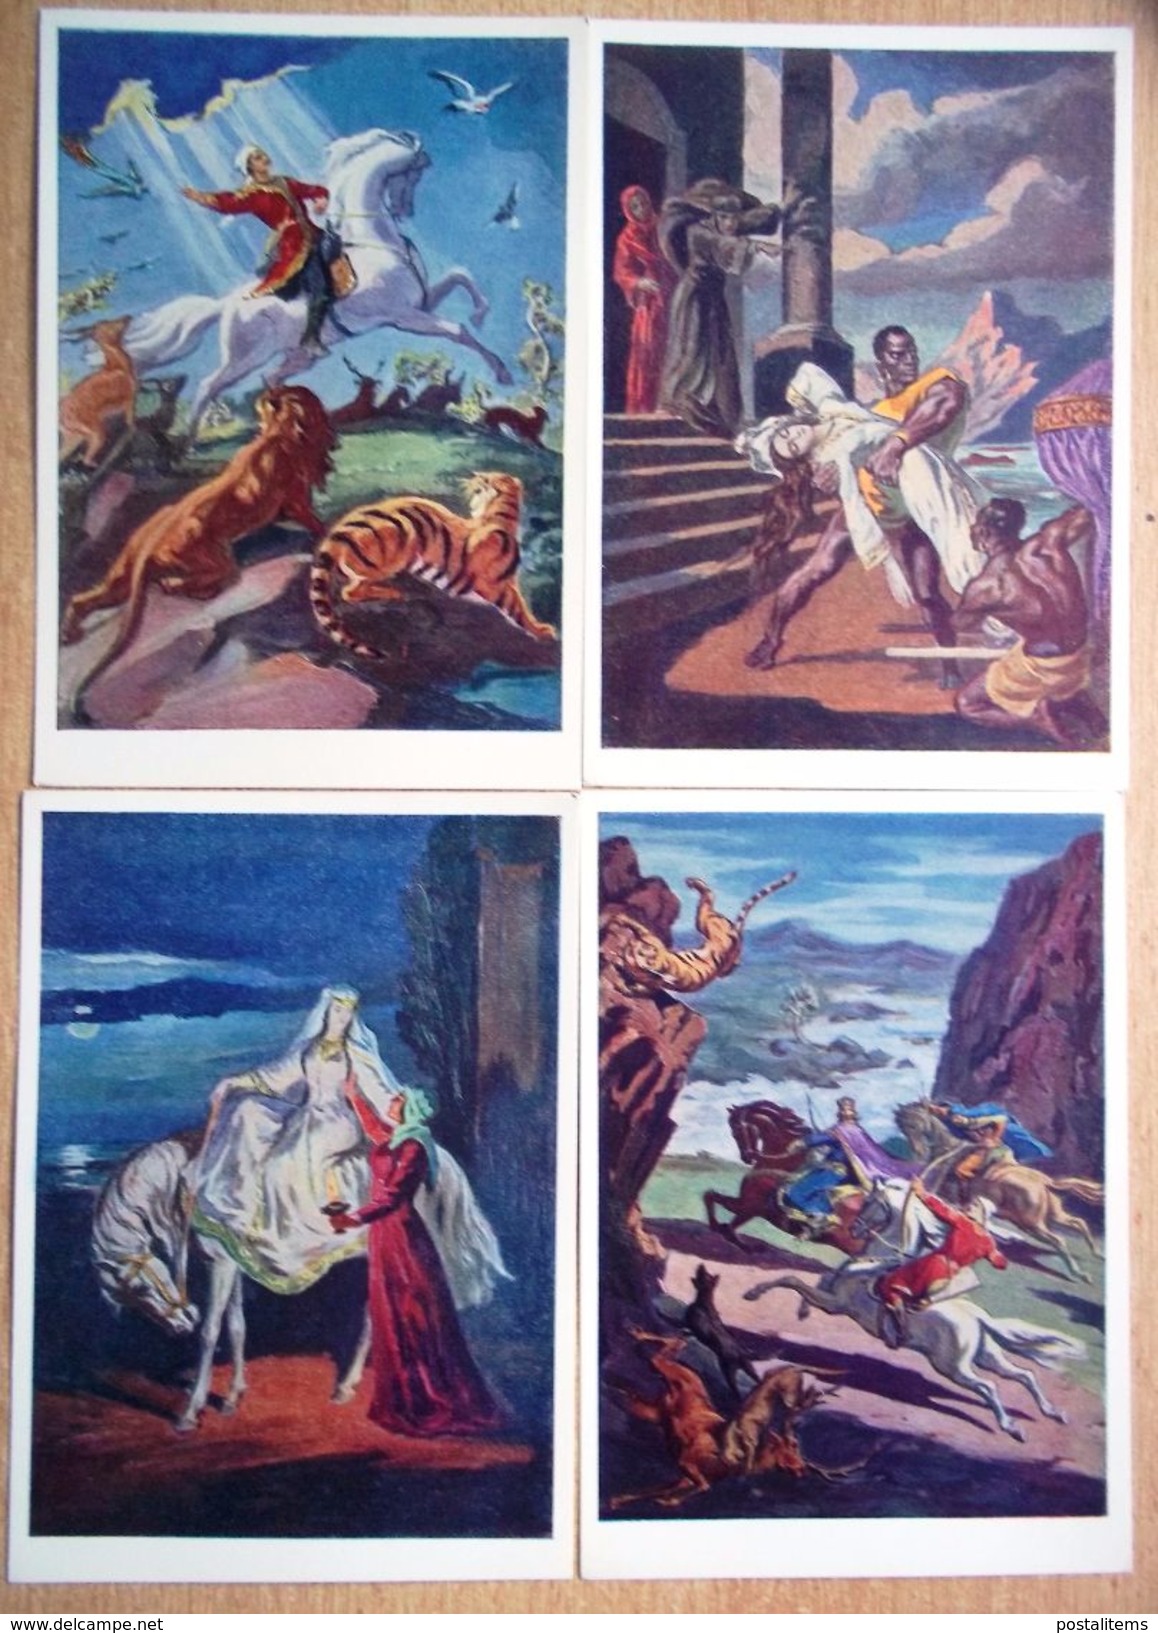 Shota Rustaveli. "The Knight In The Panther's Skin". Drawings By Irakli Toidze. Set Of 16 Postcards. 1966 - Peintures & Tableaux